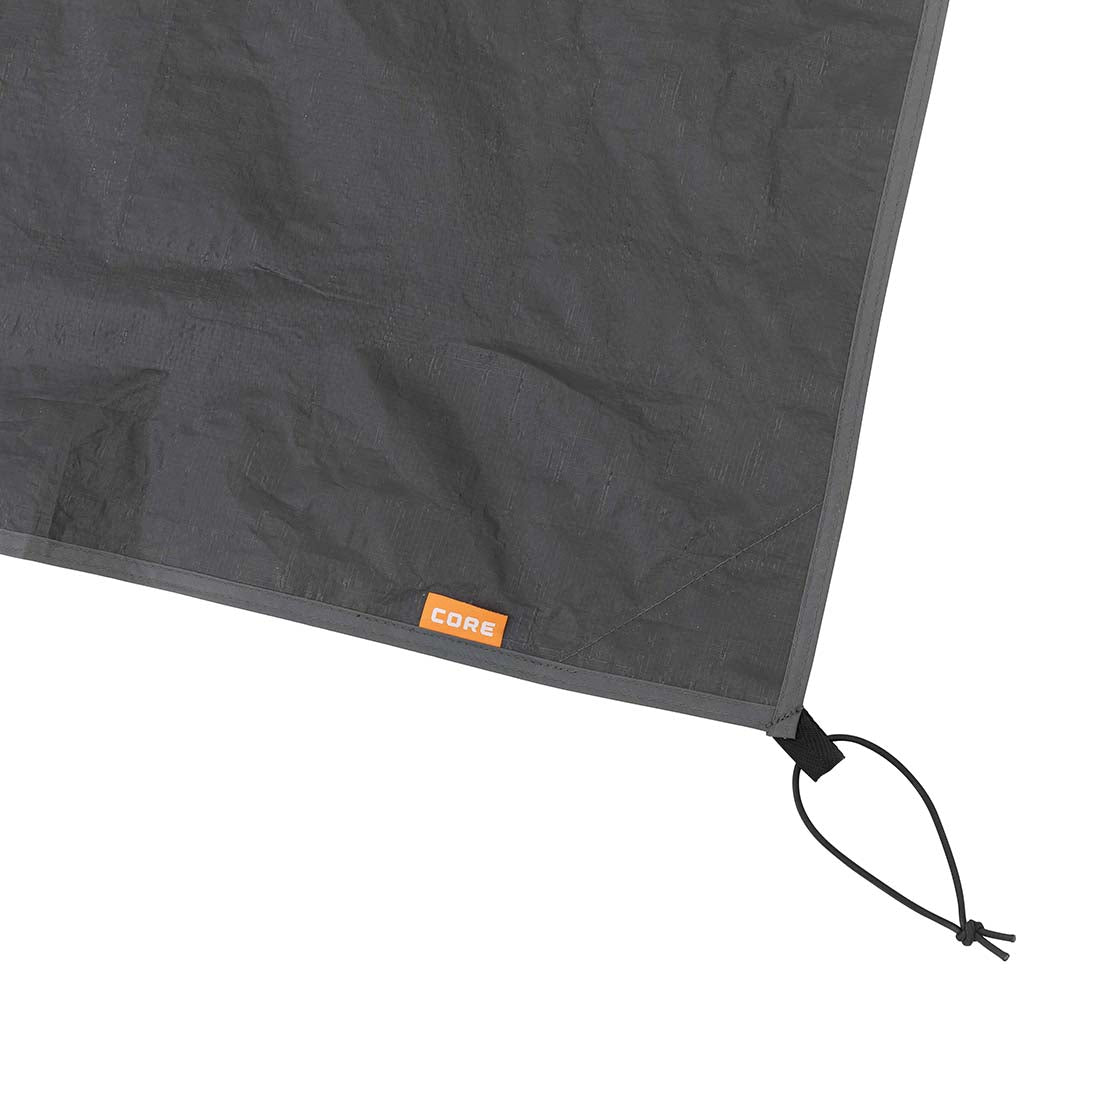 Footprint for 6 Person Tents - 10' x 9'